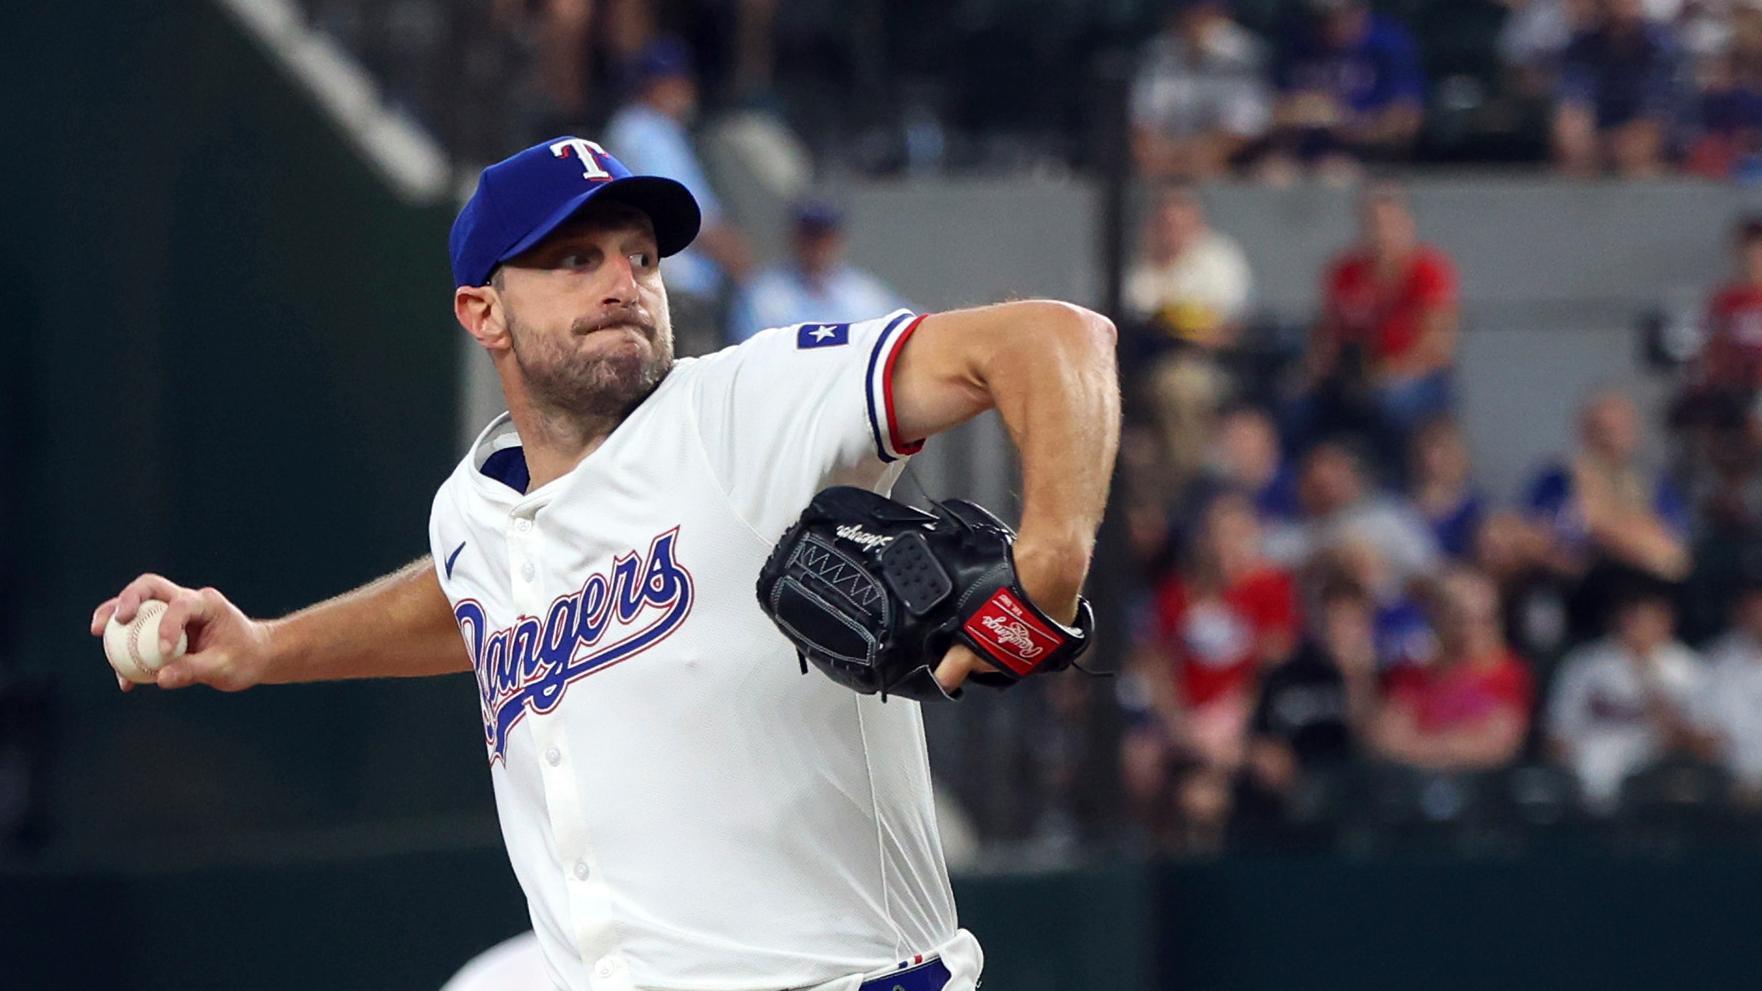 Scherzer takes over 10th on career Ks list and Semien homers as Rangers beat White Sox 2-1